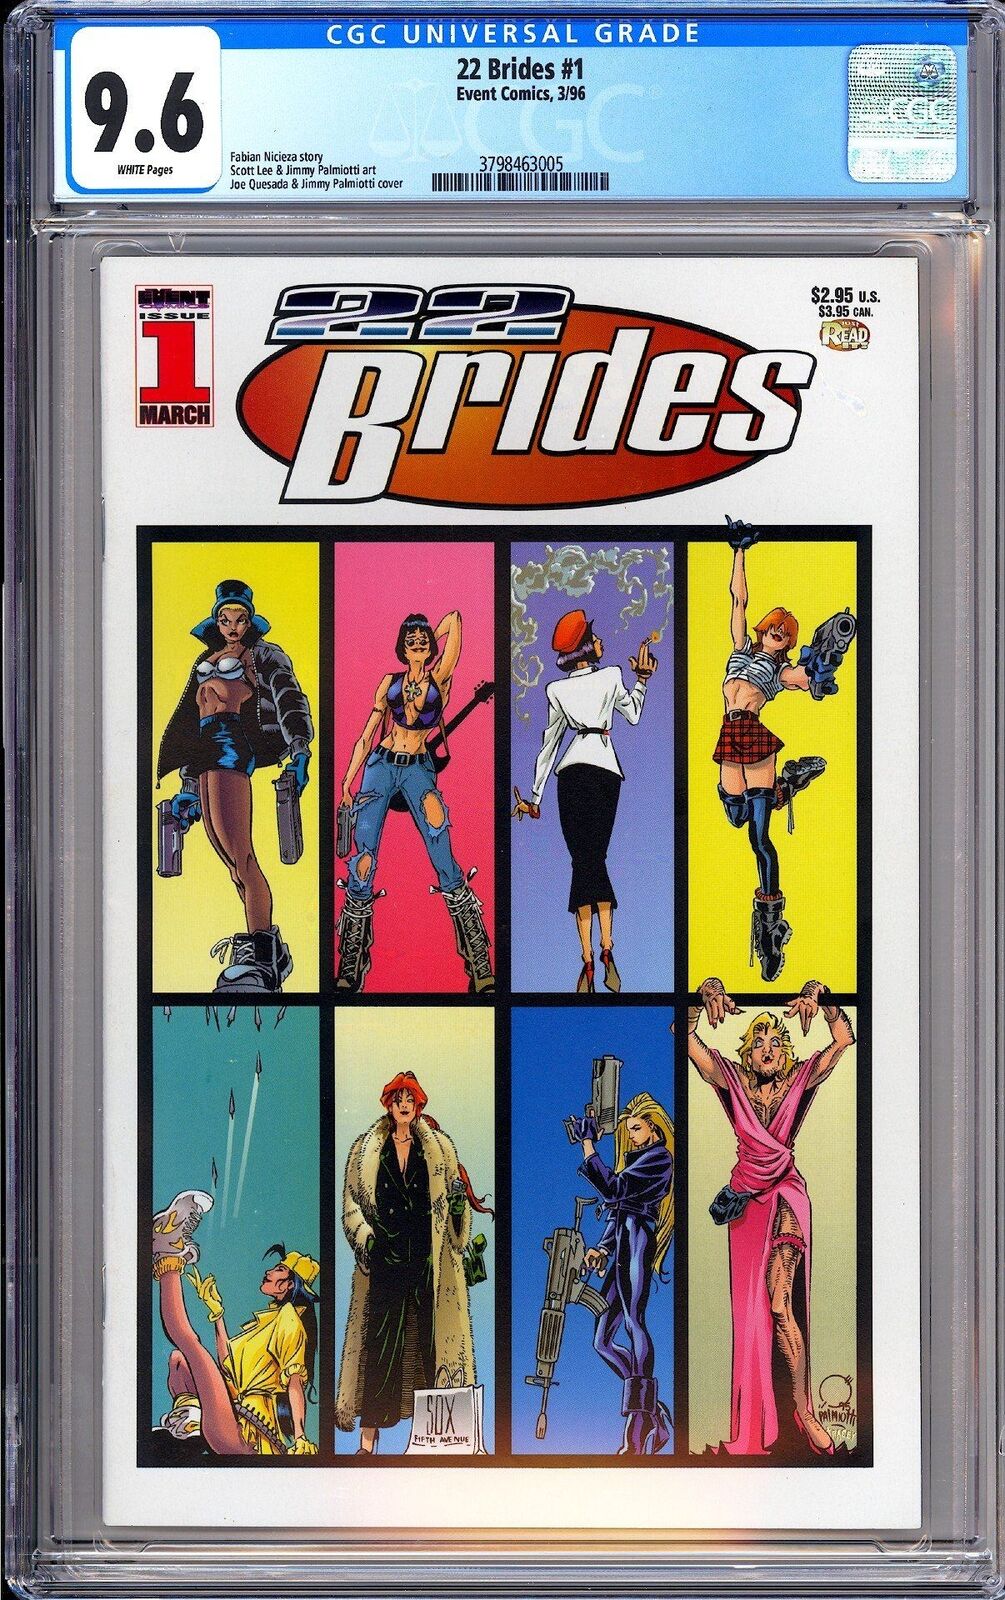 22 Brides #1 CGC 9.6 WP 1996 3798463005 1st Appearance of Painkiller Jane